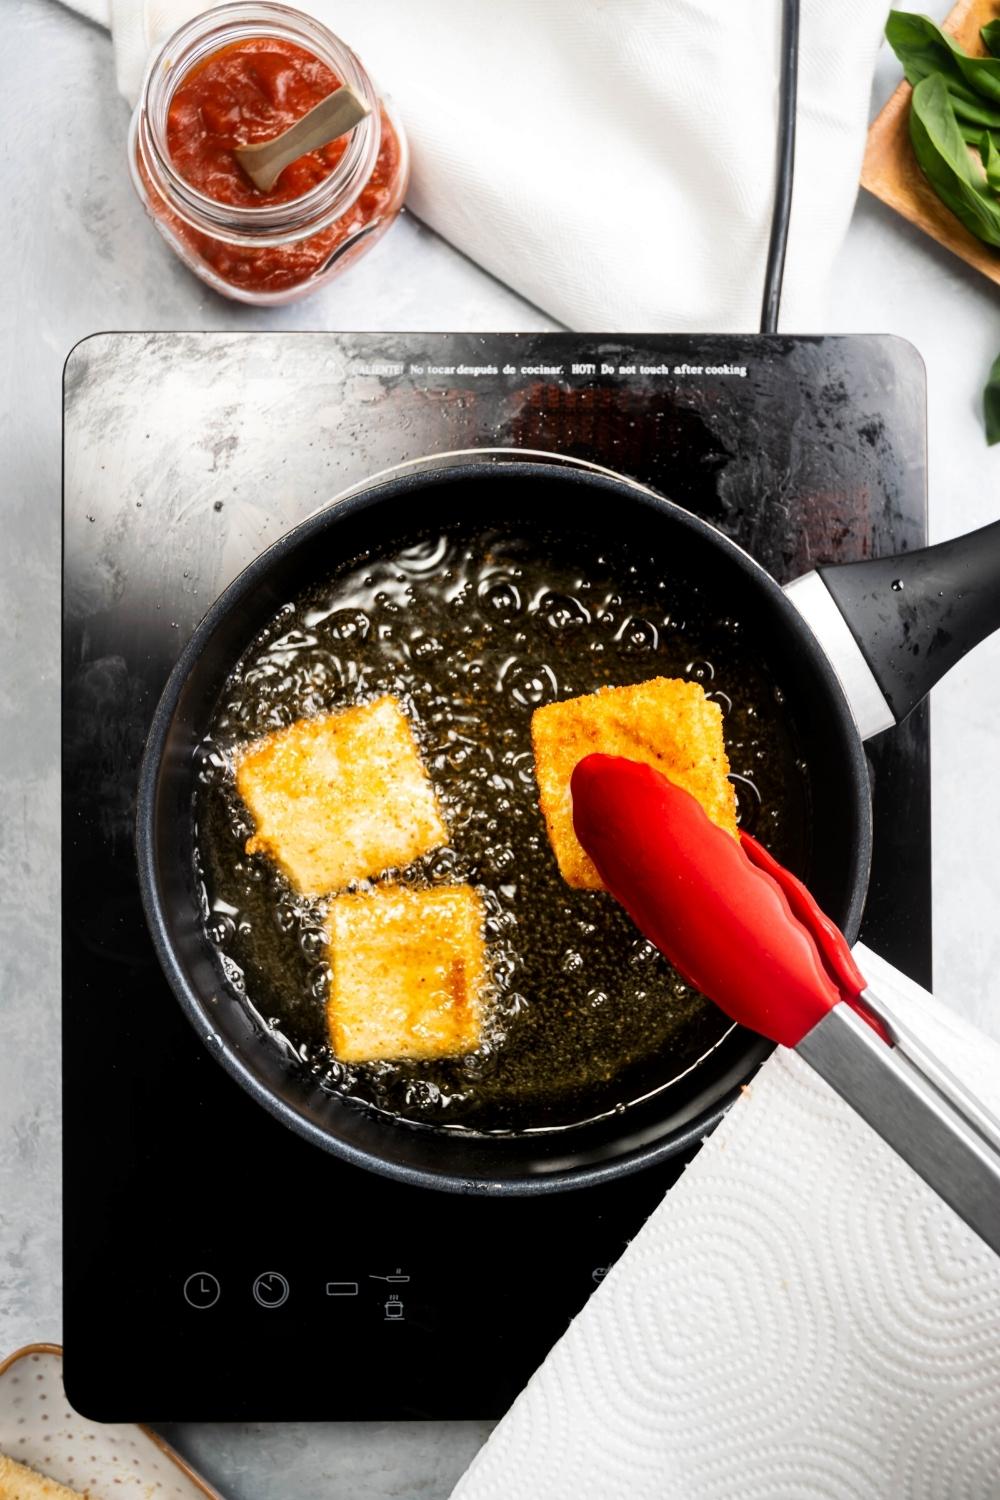 Tongs holding a piece of lasagna fritta over a pot filled with oil with two other pieces of lasagna Frida in it.